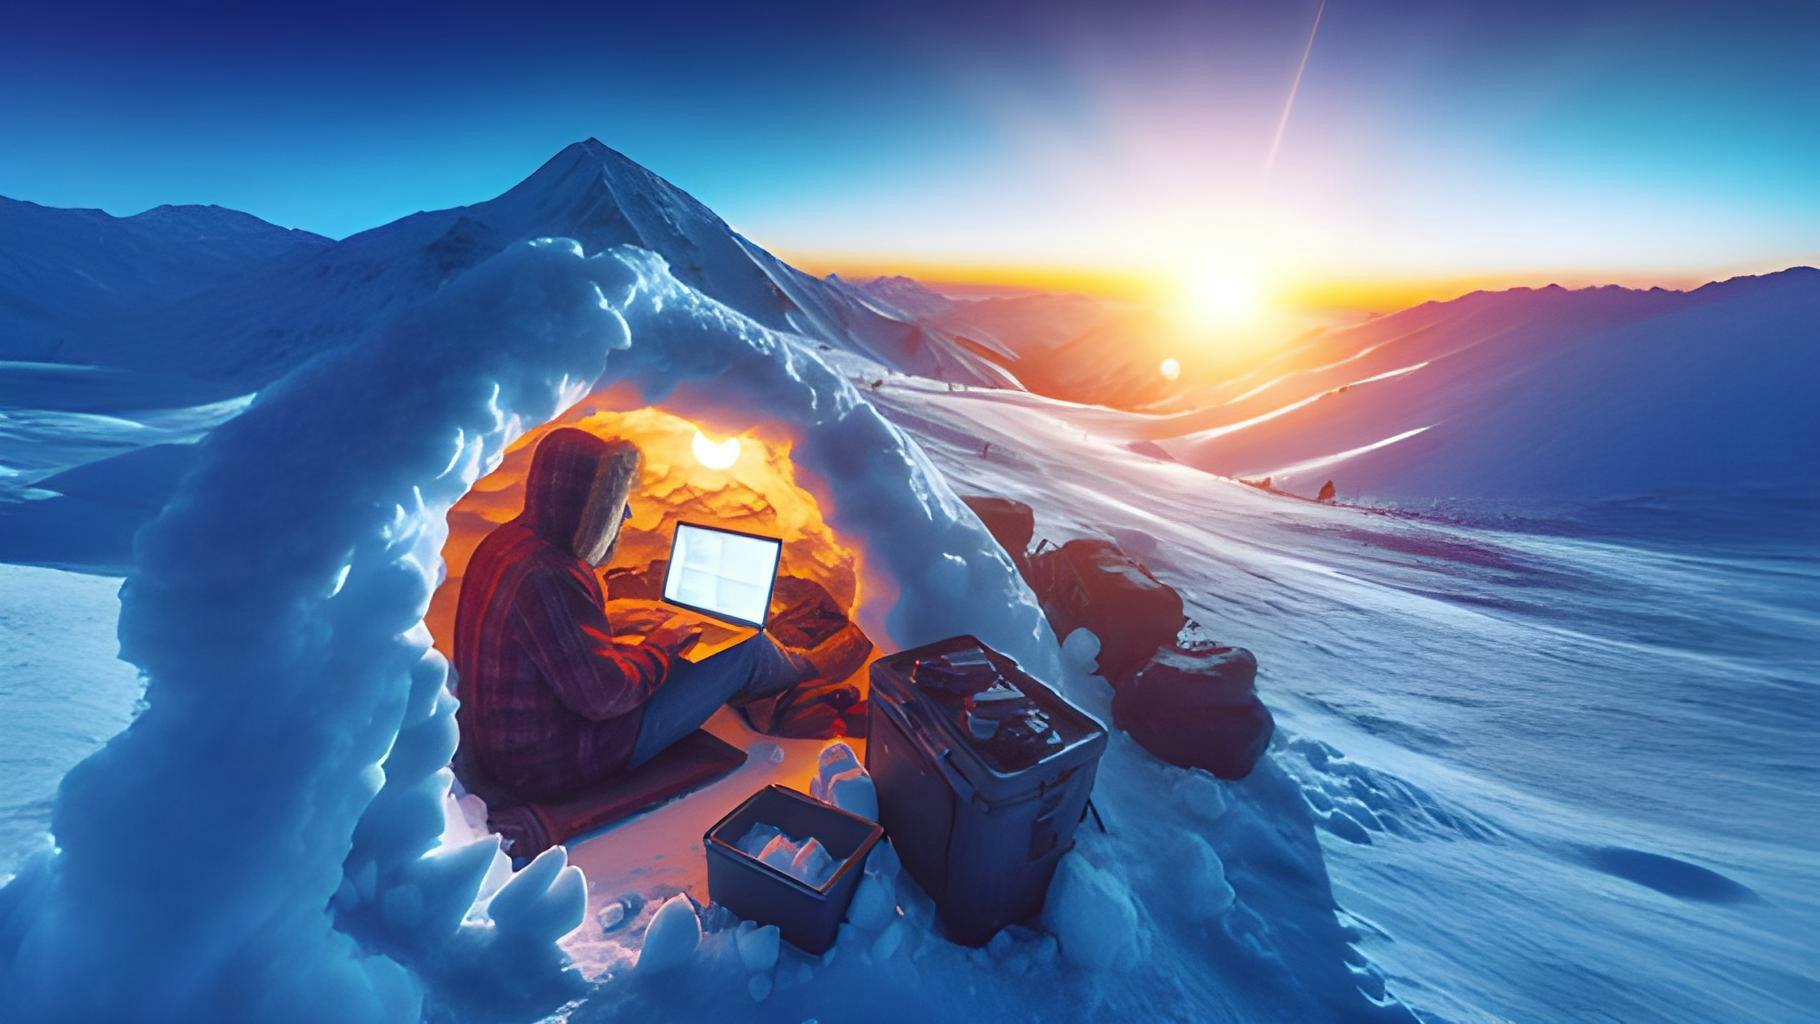 Cover Image for Coding from a Bivy in the Snow